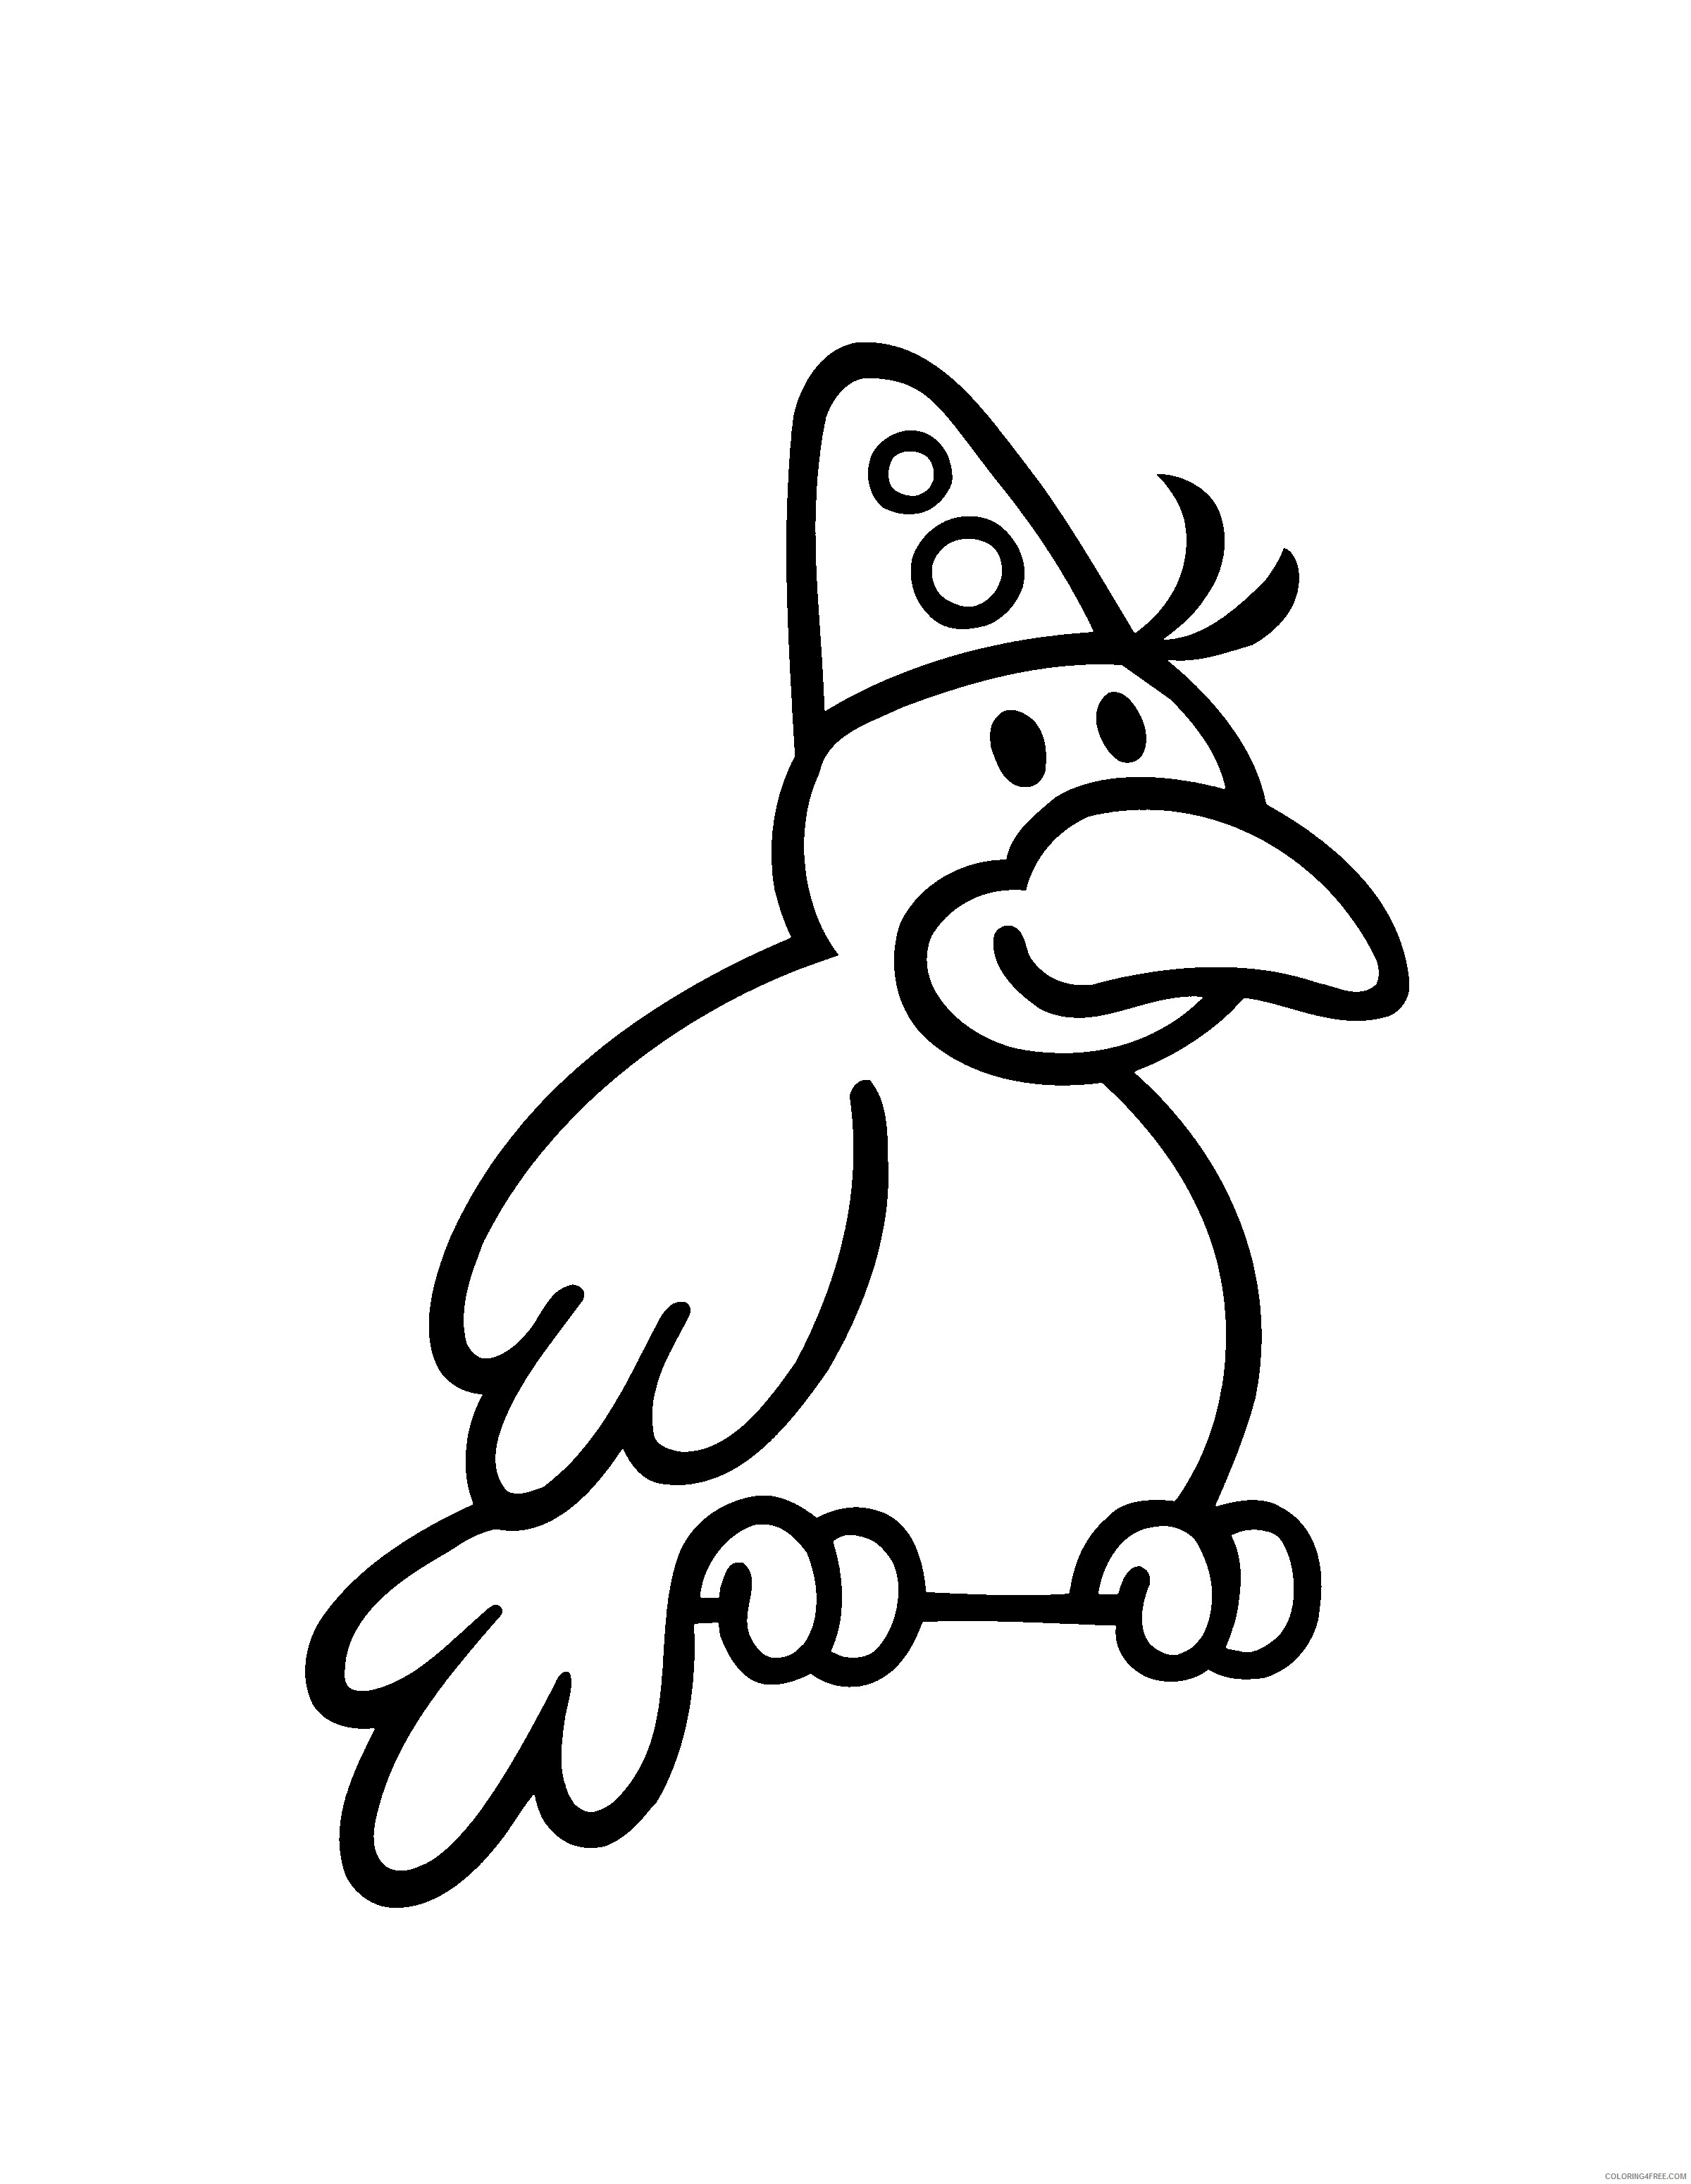 Bumba Coloring Pages Printable Coloring4free